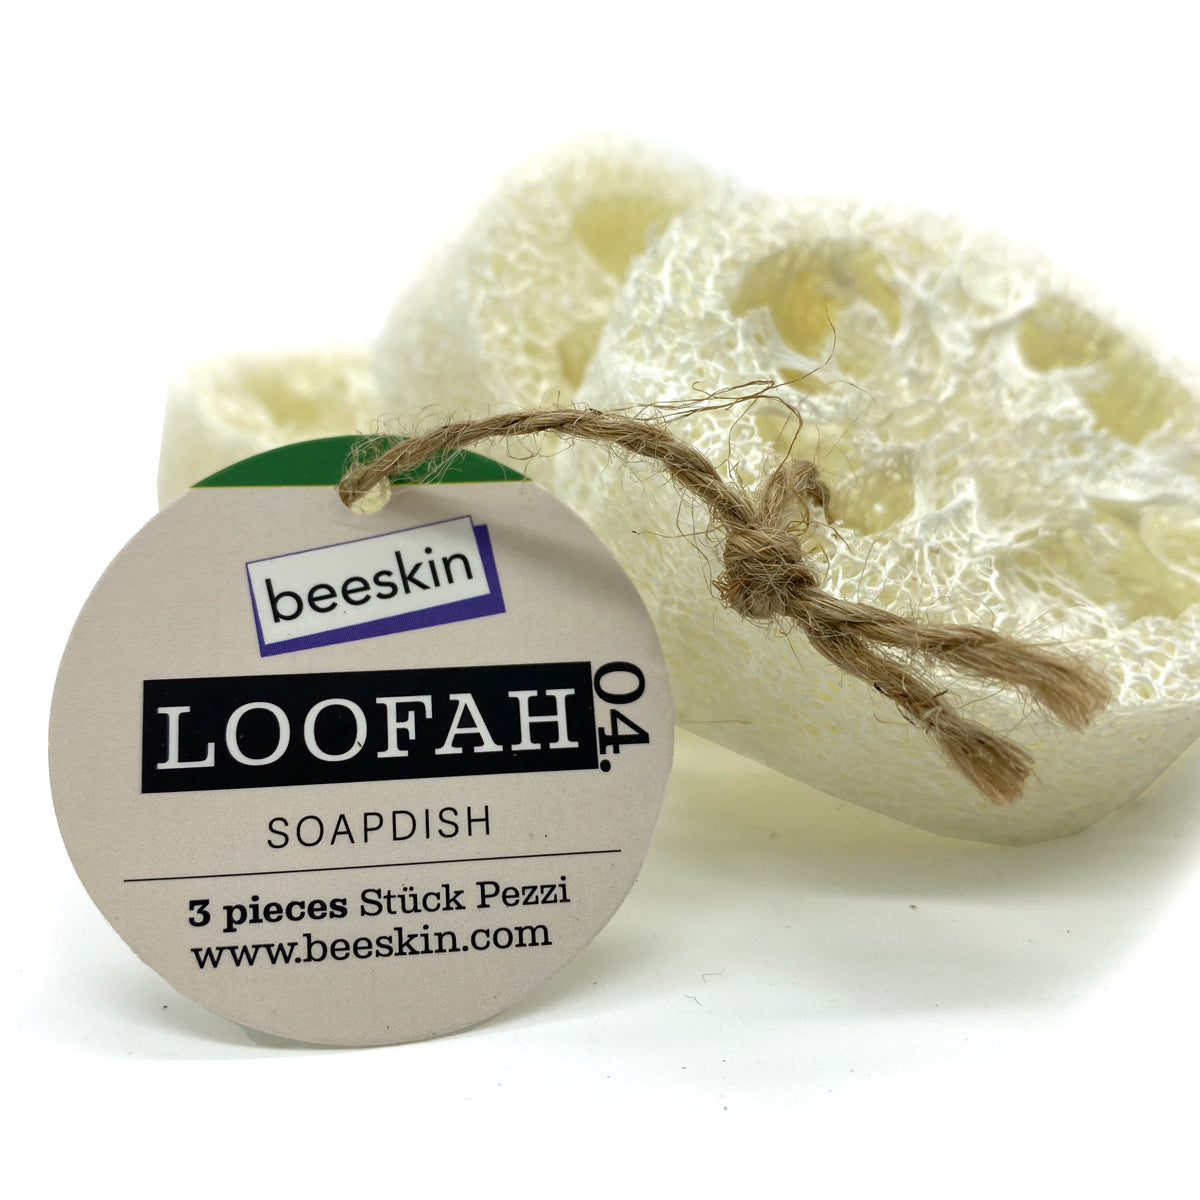 beeskin loofah 04 set of 3 pieces with a tag